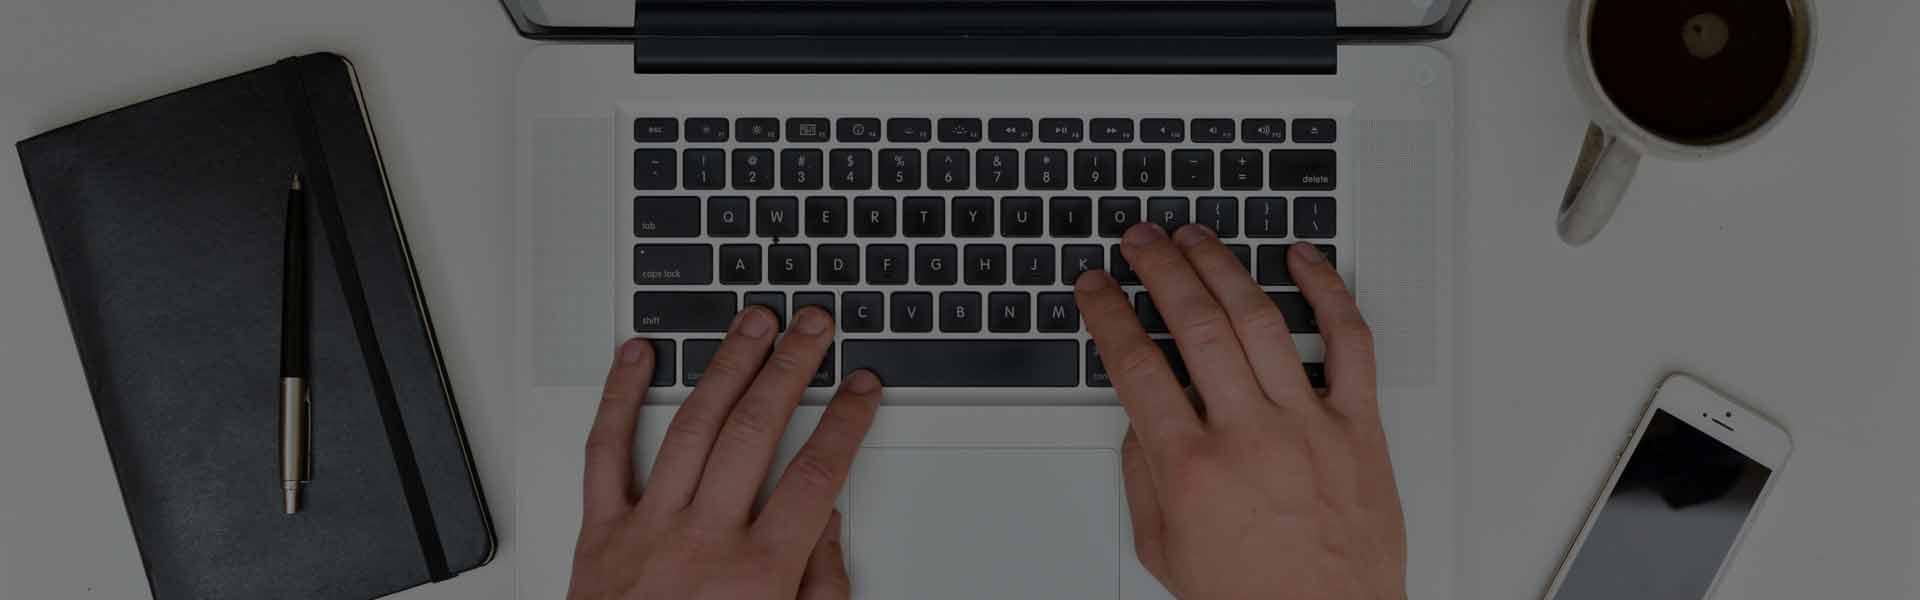 Header image showing hands typing on a computer, symbolizing the ease of contacting Quijano Law, a leading immigration law firm in Atlanta, GA, for expert immigration advice and assistance.